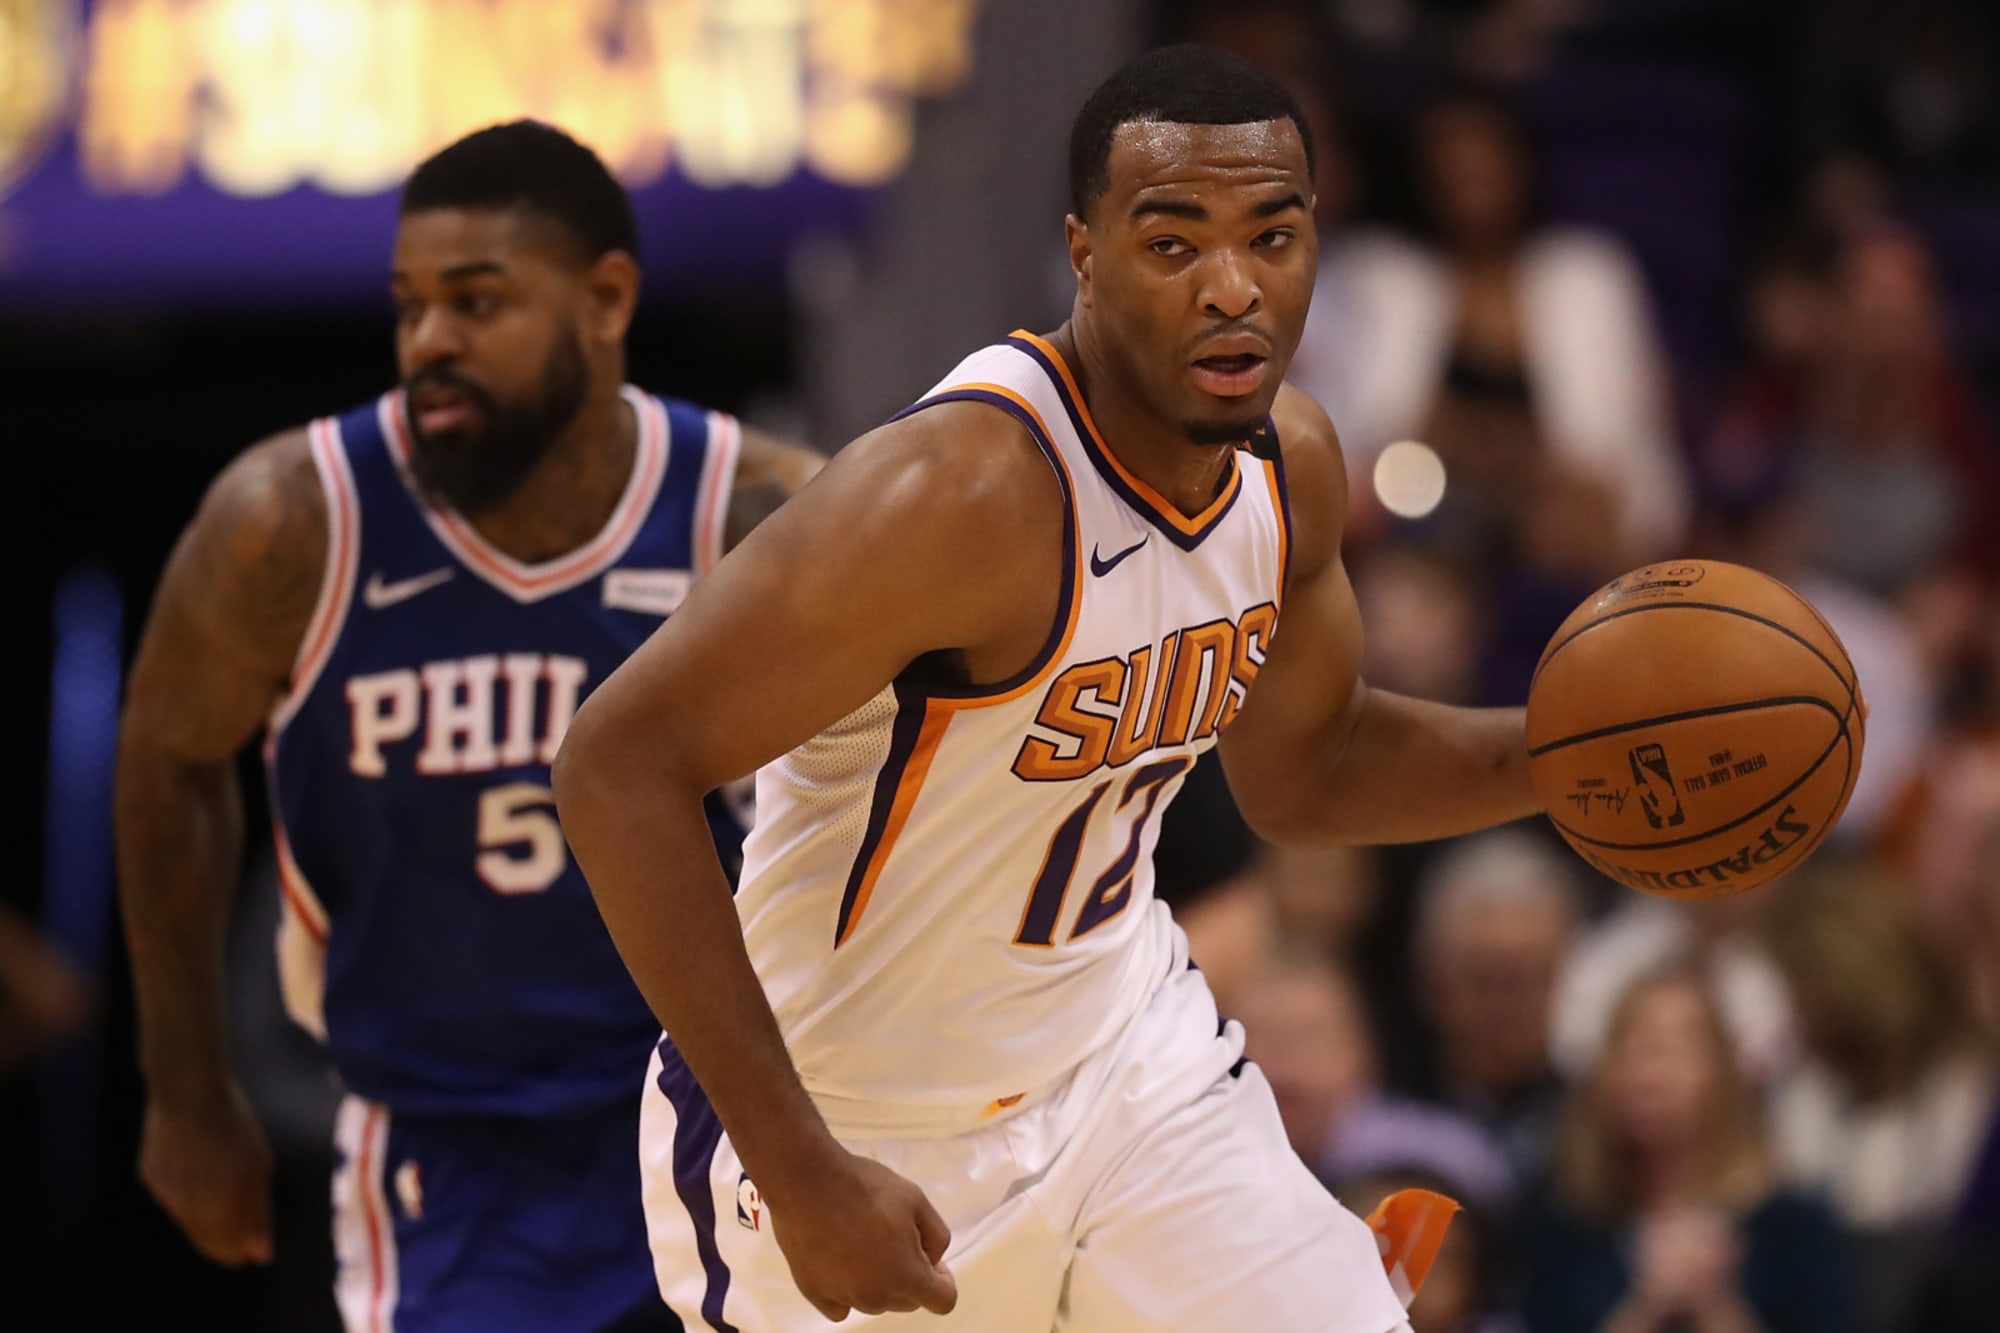 Phoenix Suns forward T.J. Warren to miss 2-3 weeks with ankle injury